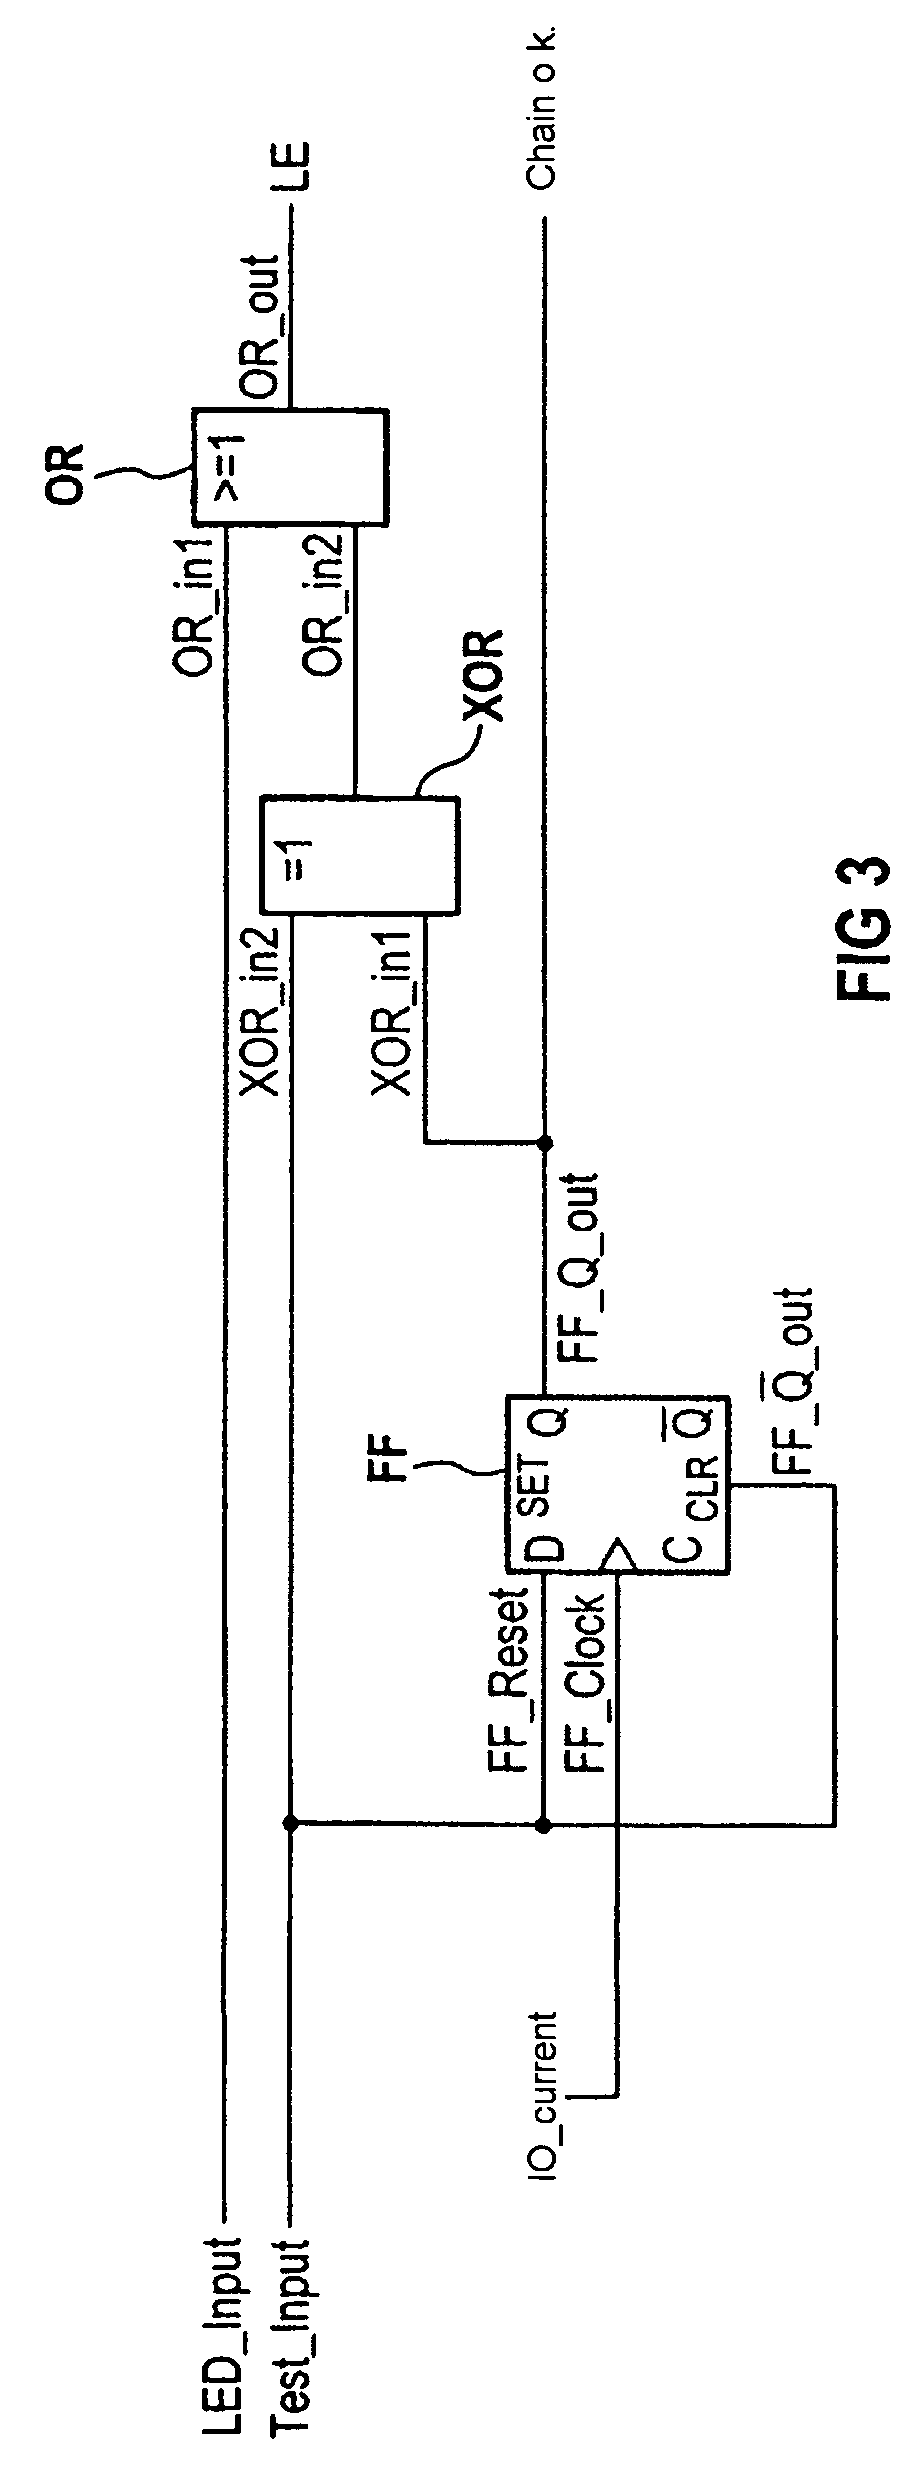 Illuminated sign for traffic control and method for functional monitoring of such a sign